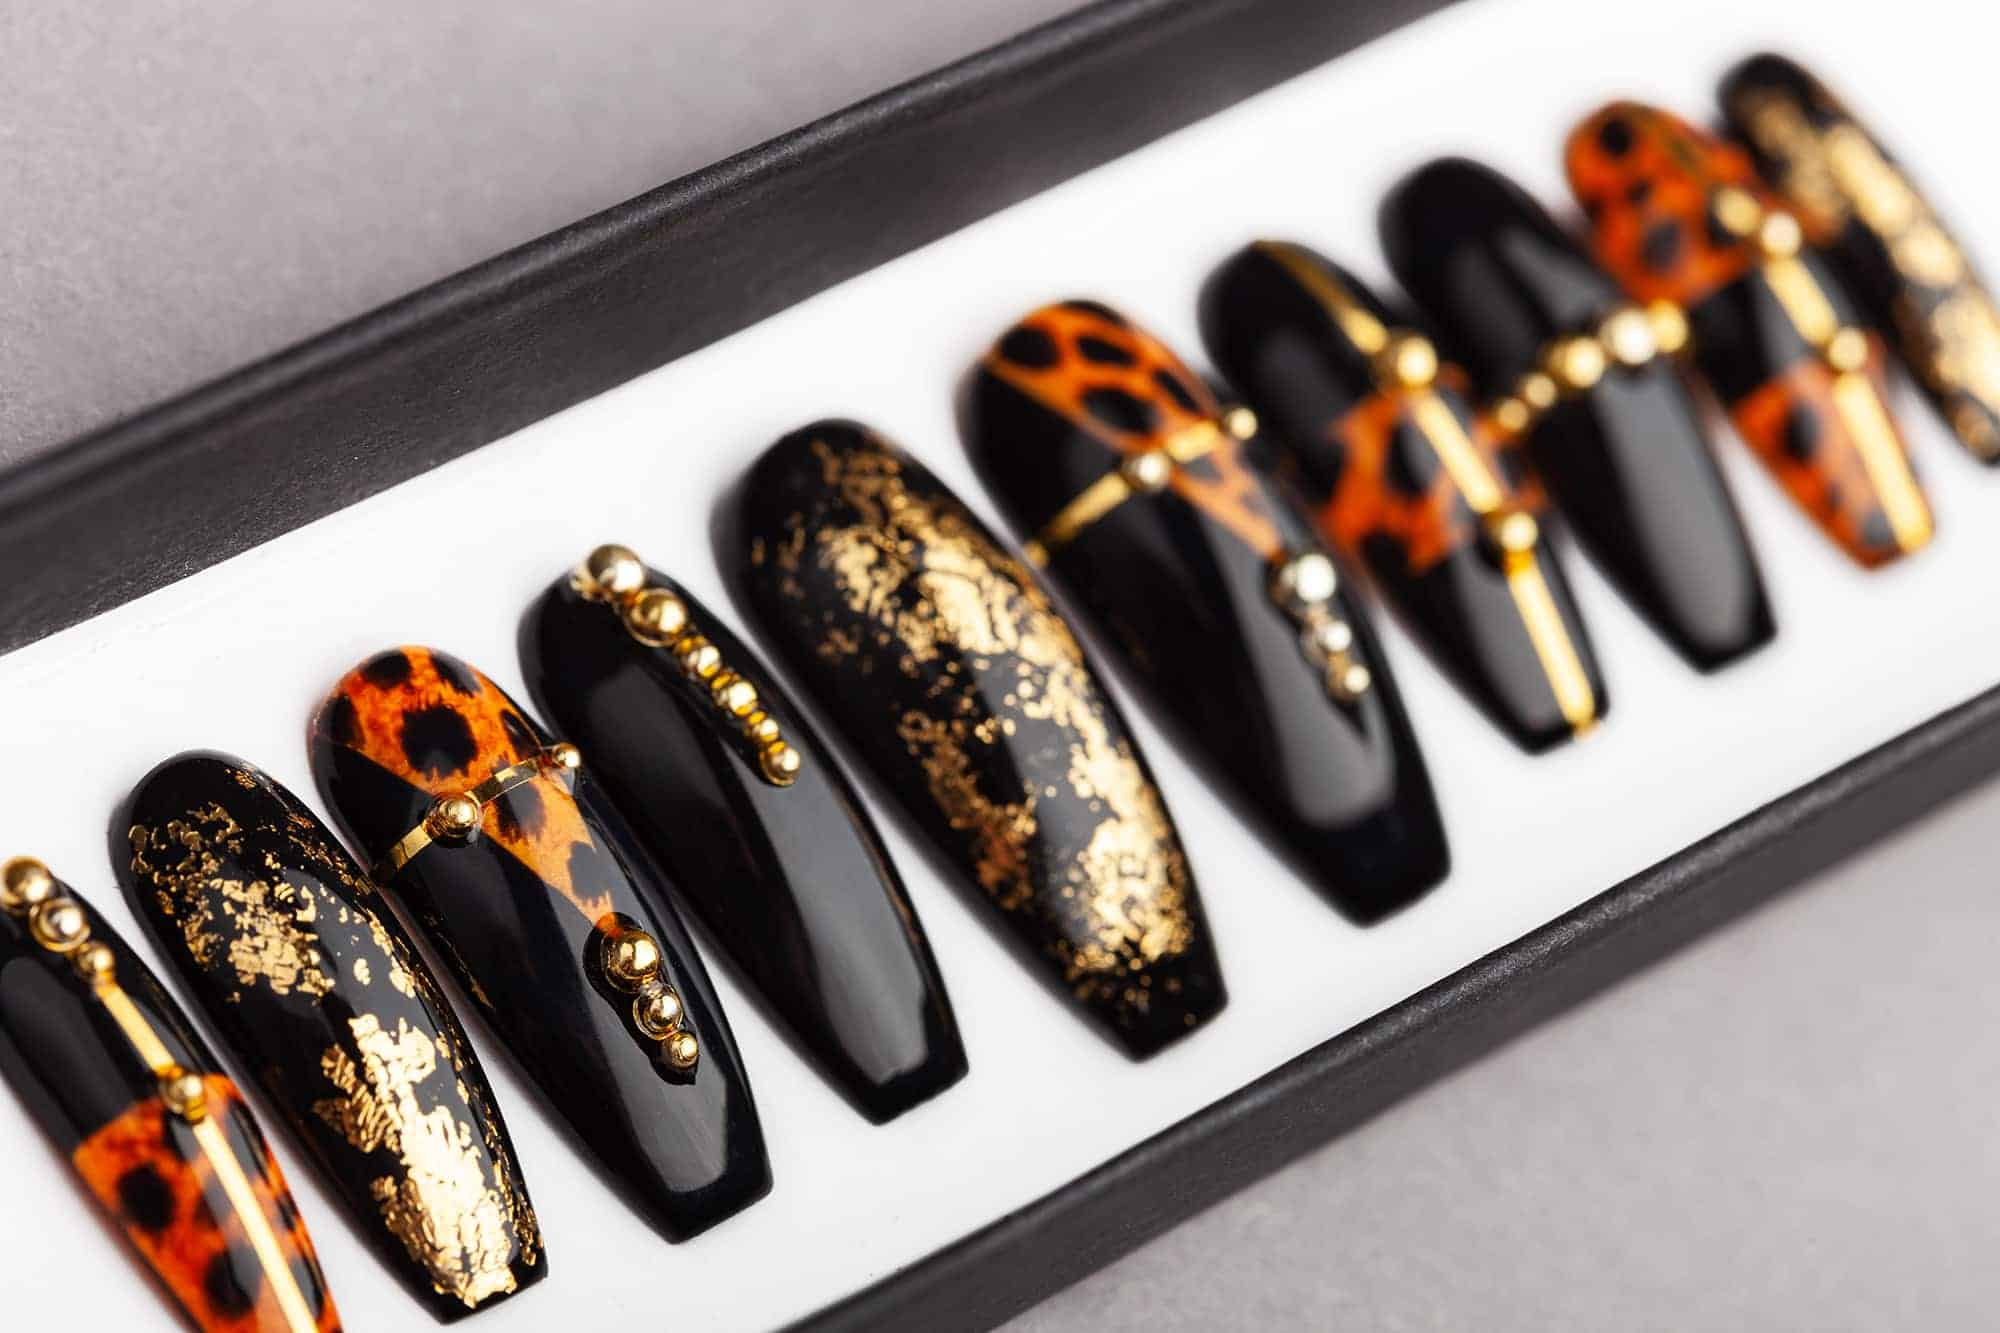 Leopard Press on Nails with Golden Foil | Hand-painted Nail Art | Fake Nails | False Nails | Glue On Nails